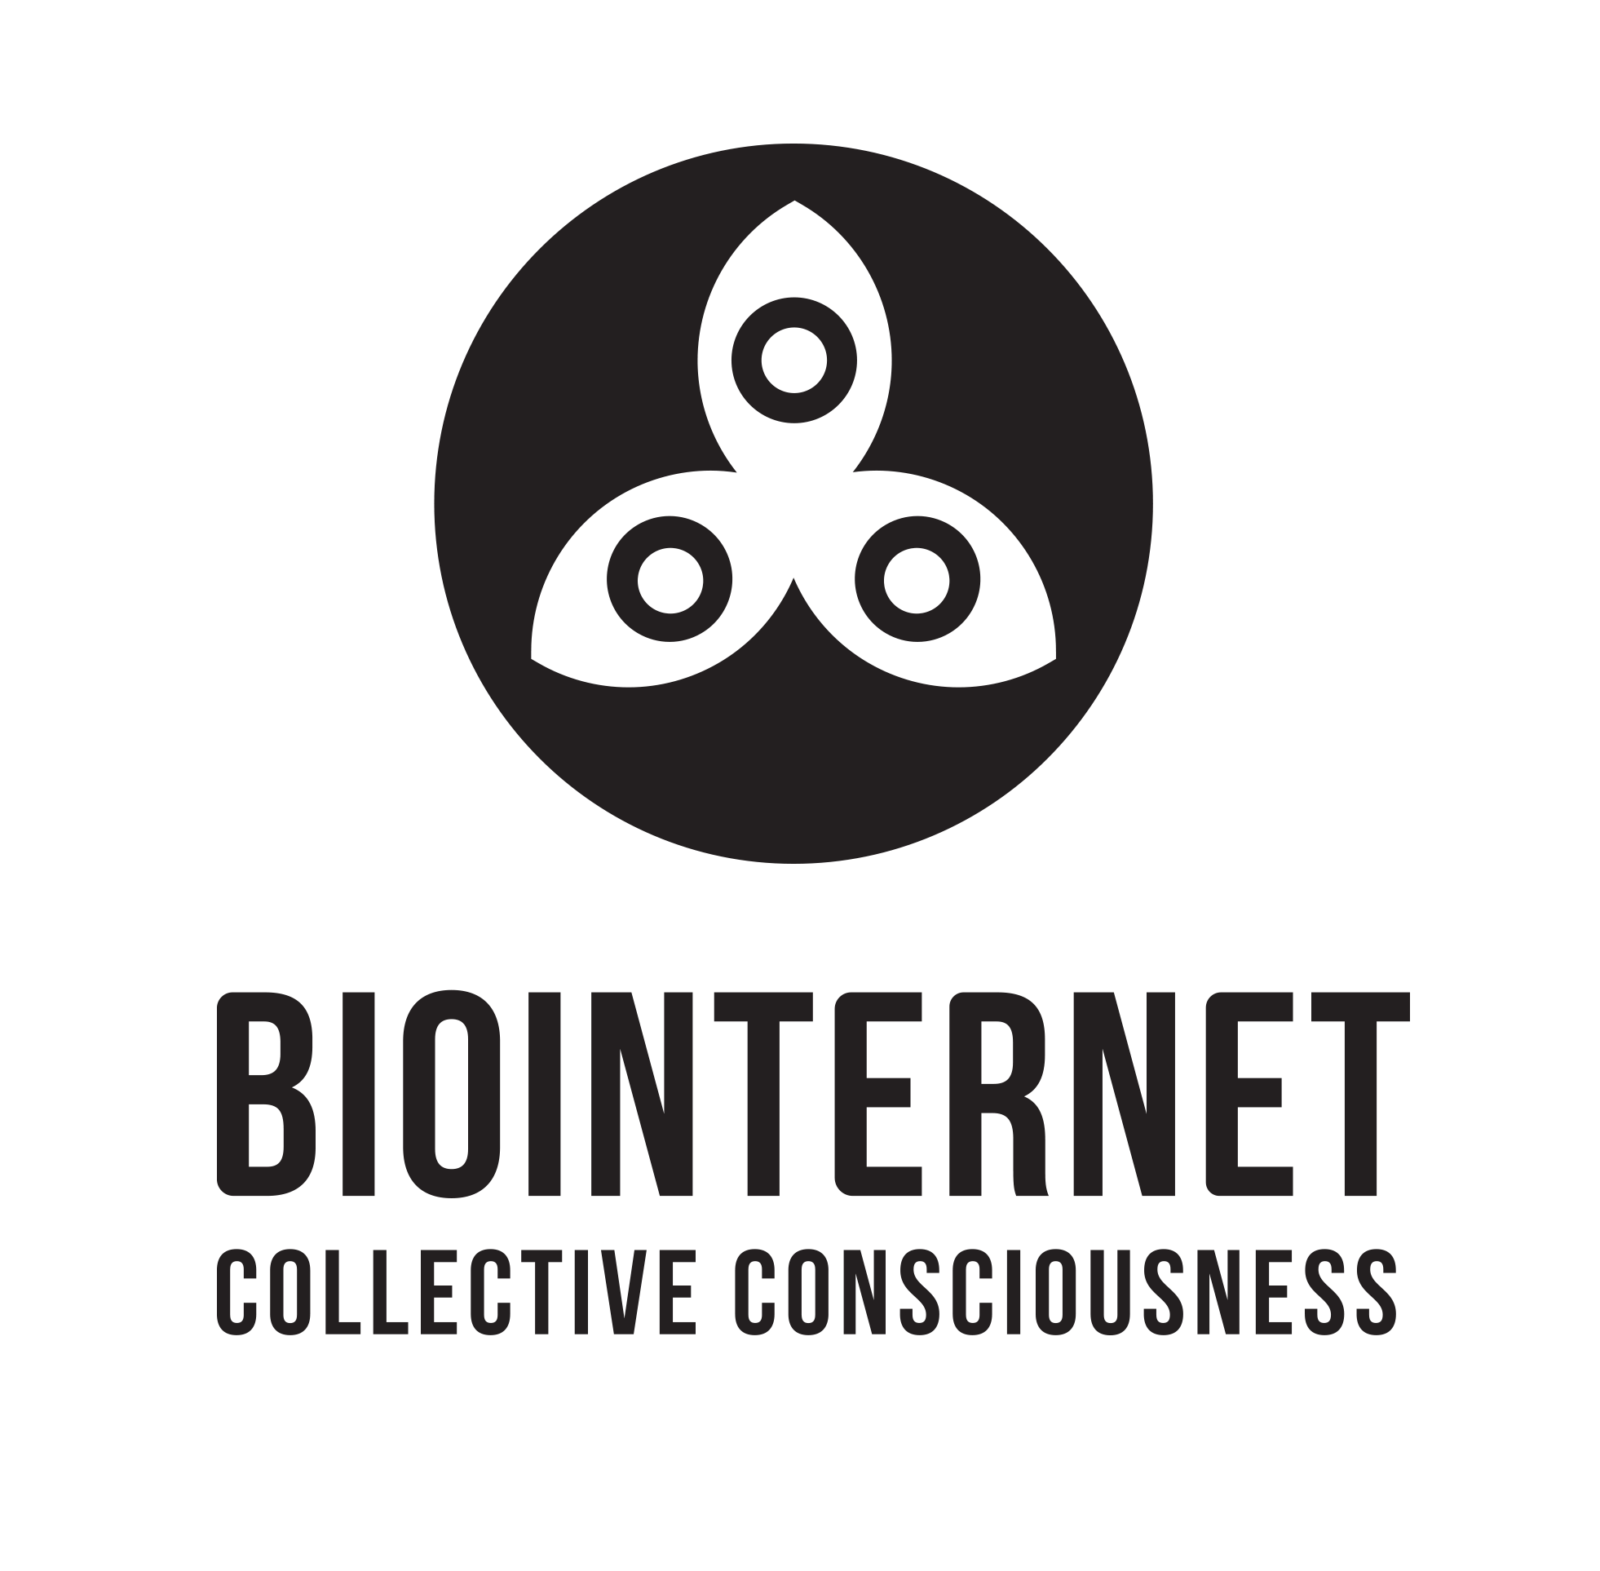 The Biointernet – Noosphere, Morphogenetic field, Akashic records, Human Internet  The Biointernet is a compendium of all things, events, thoughts, words, emotions, and intent ever to have occurred in the past, present, or future. And all variants of this possibilities.  The Biointernet – interdisciplinary project have been established in 2012 by Boris Zolotov, Kirill Korotkov and Sergey Avdeev for Research and Development Intuitive Information Sight technologies and other Biointernet modes-practices.  Project Manager Kirill Korotkov